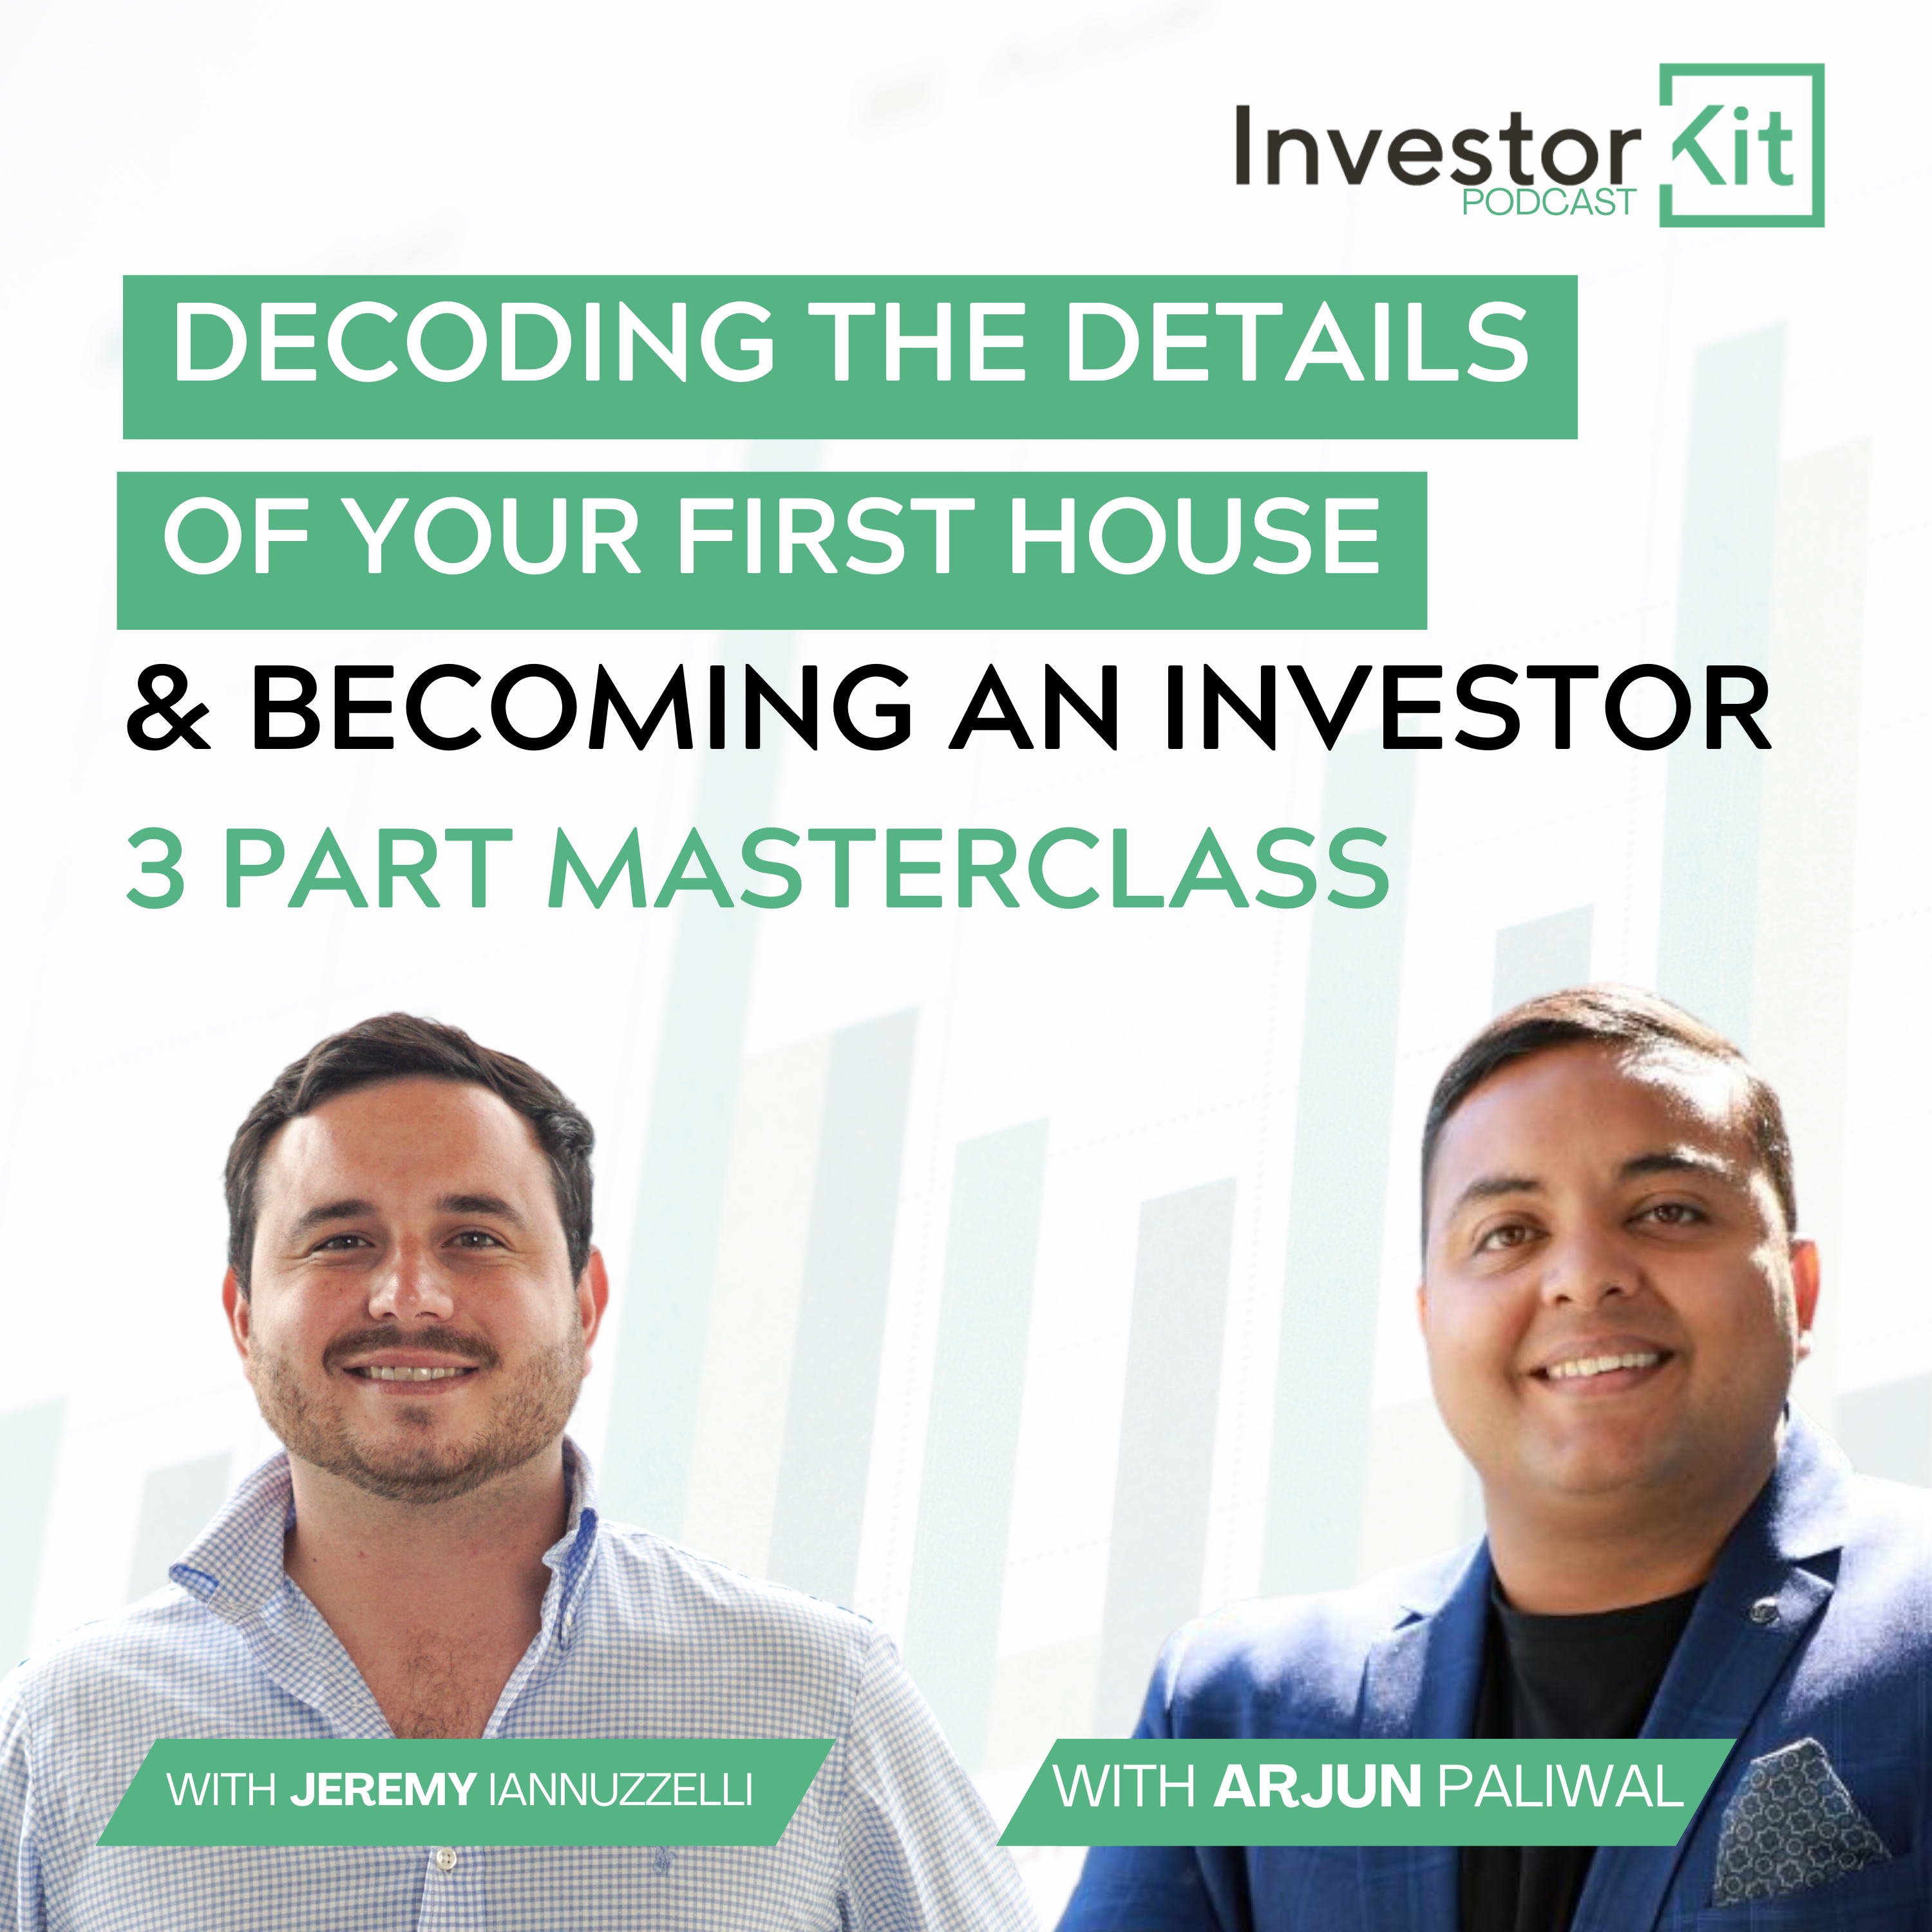 Decoding the details of your first house & becoming an investor, 3 part Master Class - With Jeremy Iannuzzelli & Arjun Paliwal